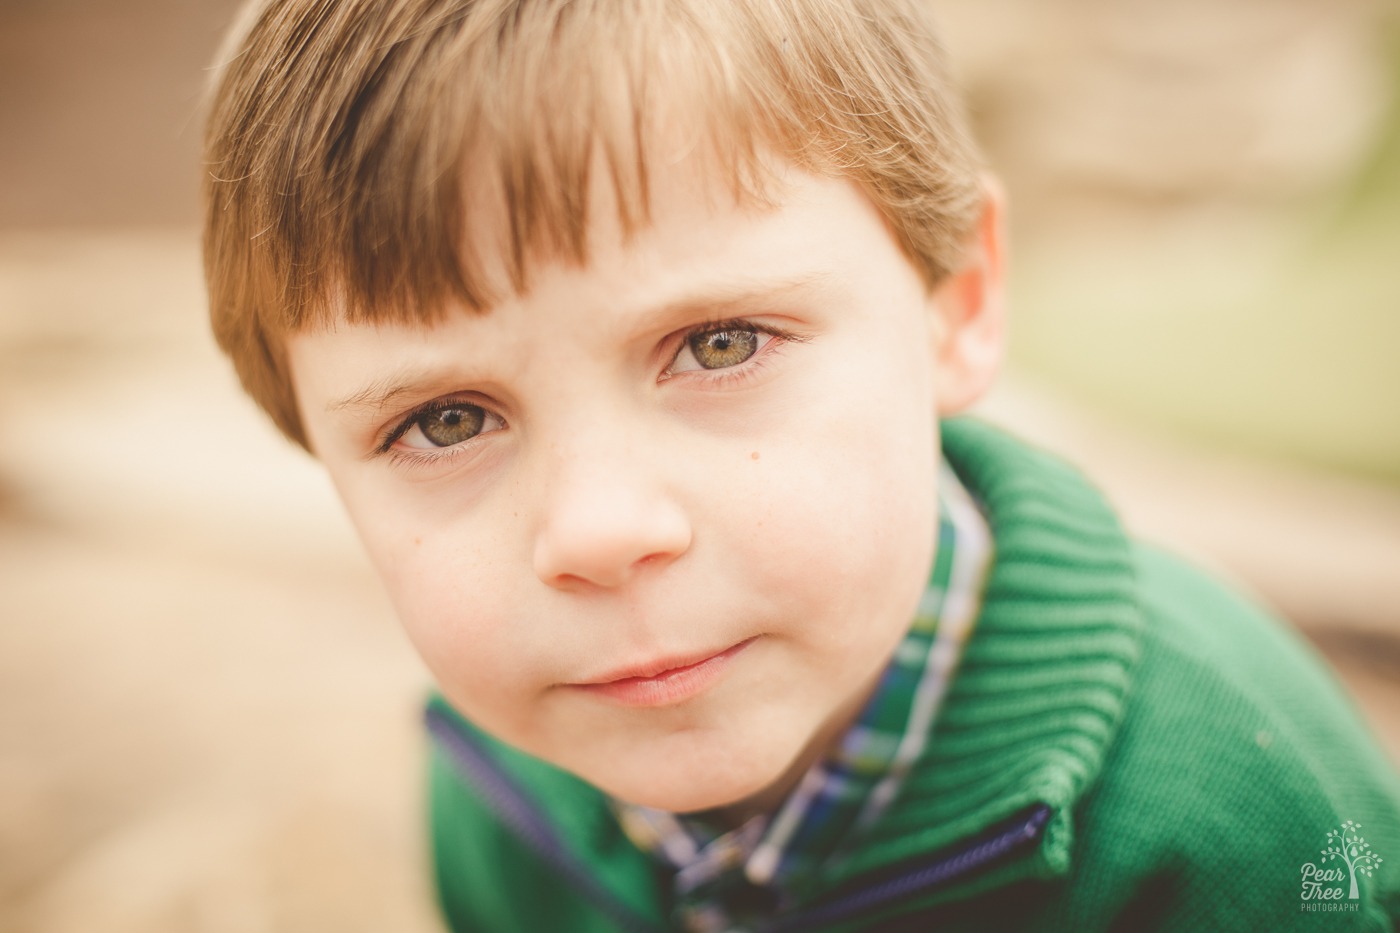 Cute little boy with green eyes and wearing a green sweater staring intently at the camera